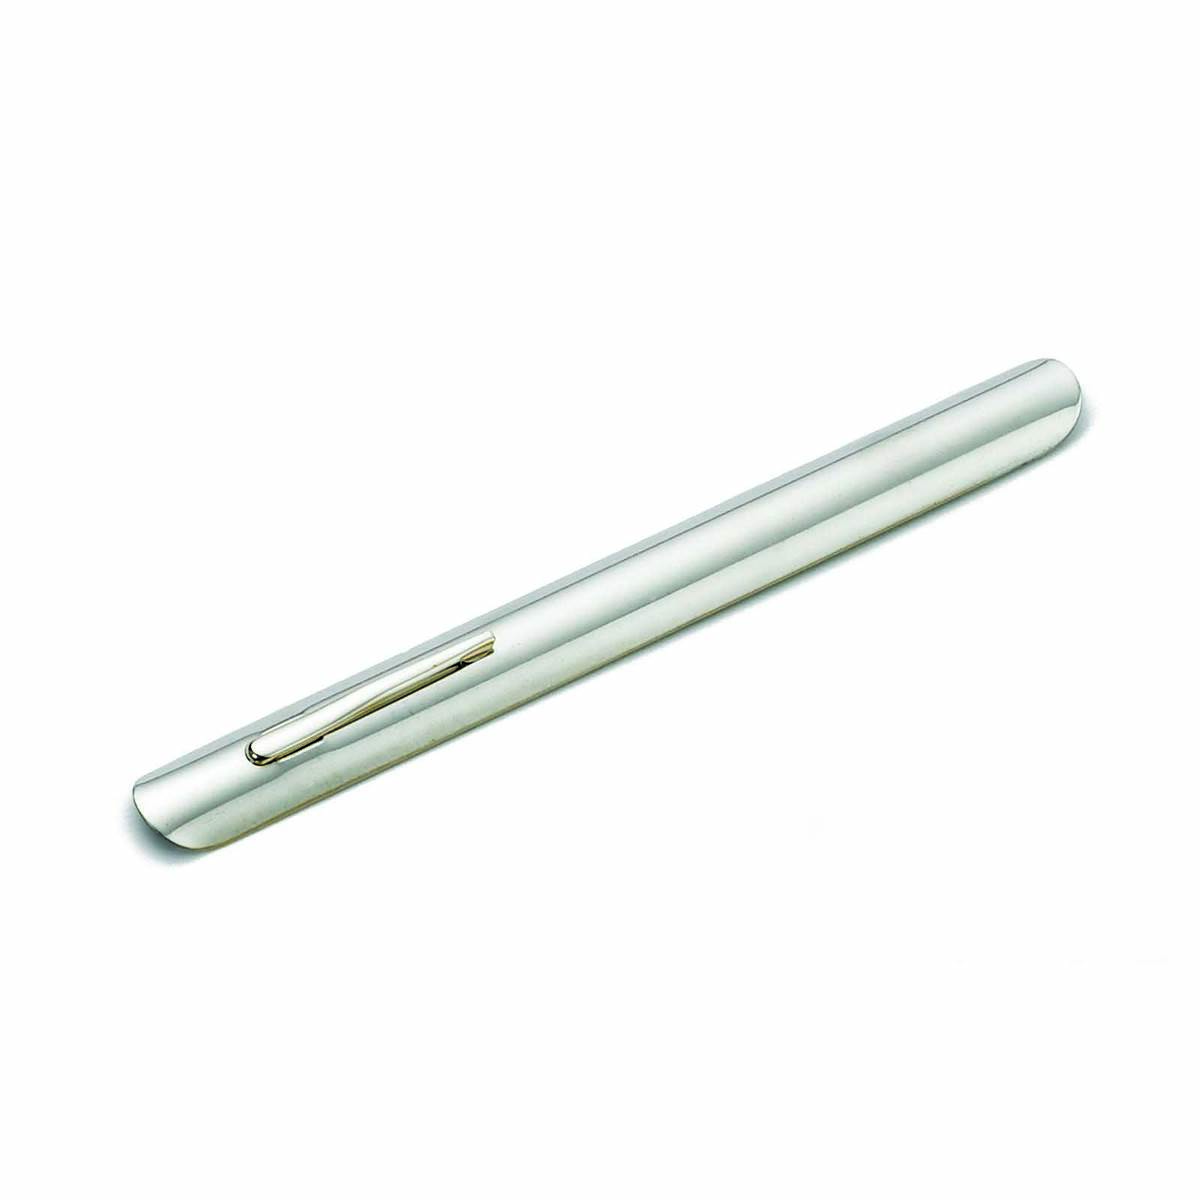 TABLE CRUMBLER 15cm/6" STAINLESS STEEL519